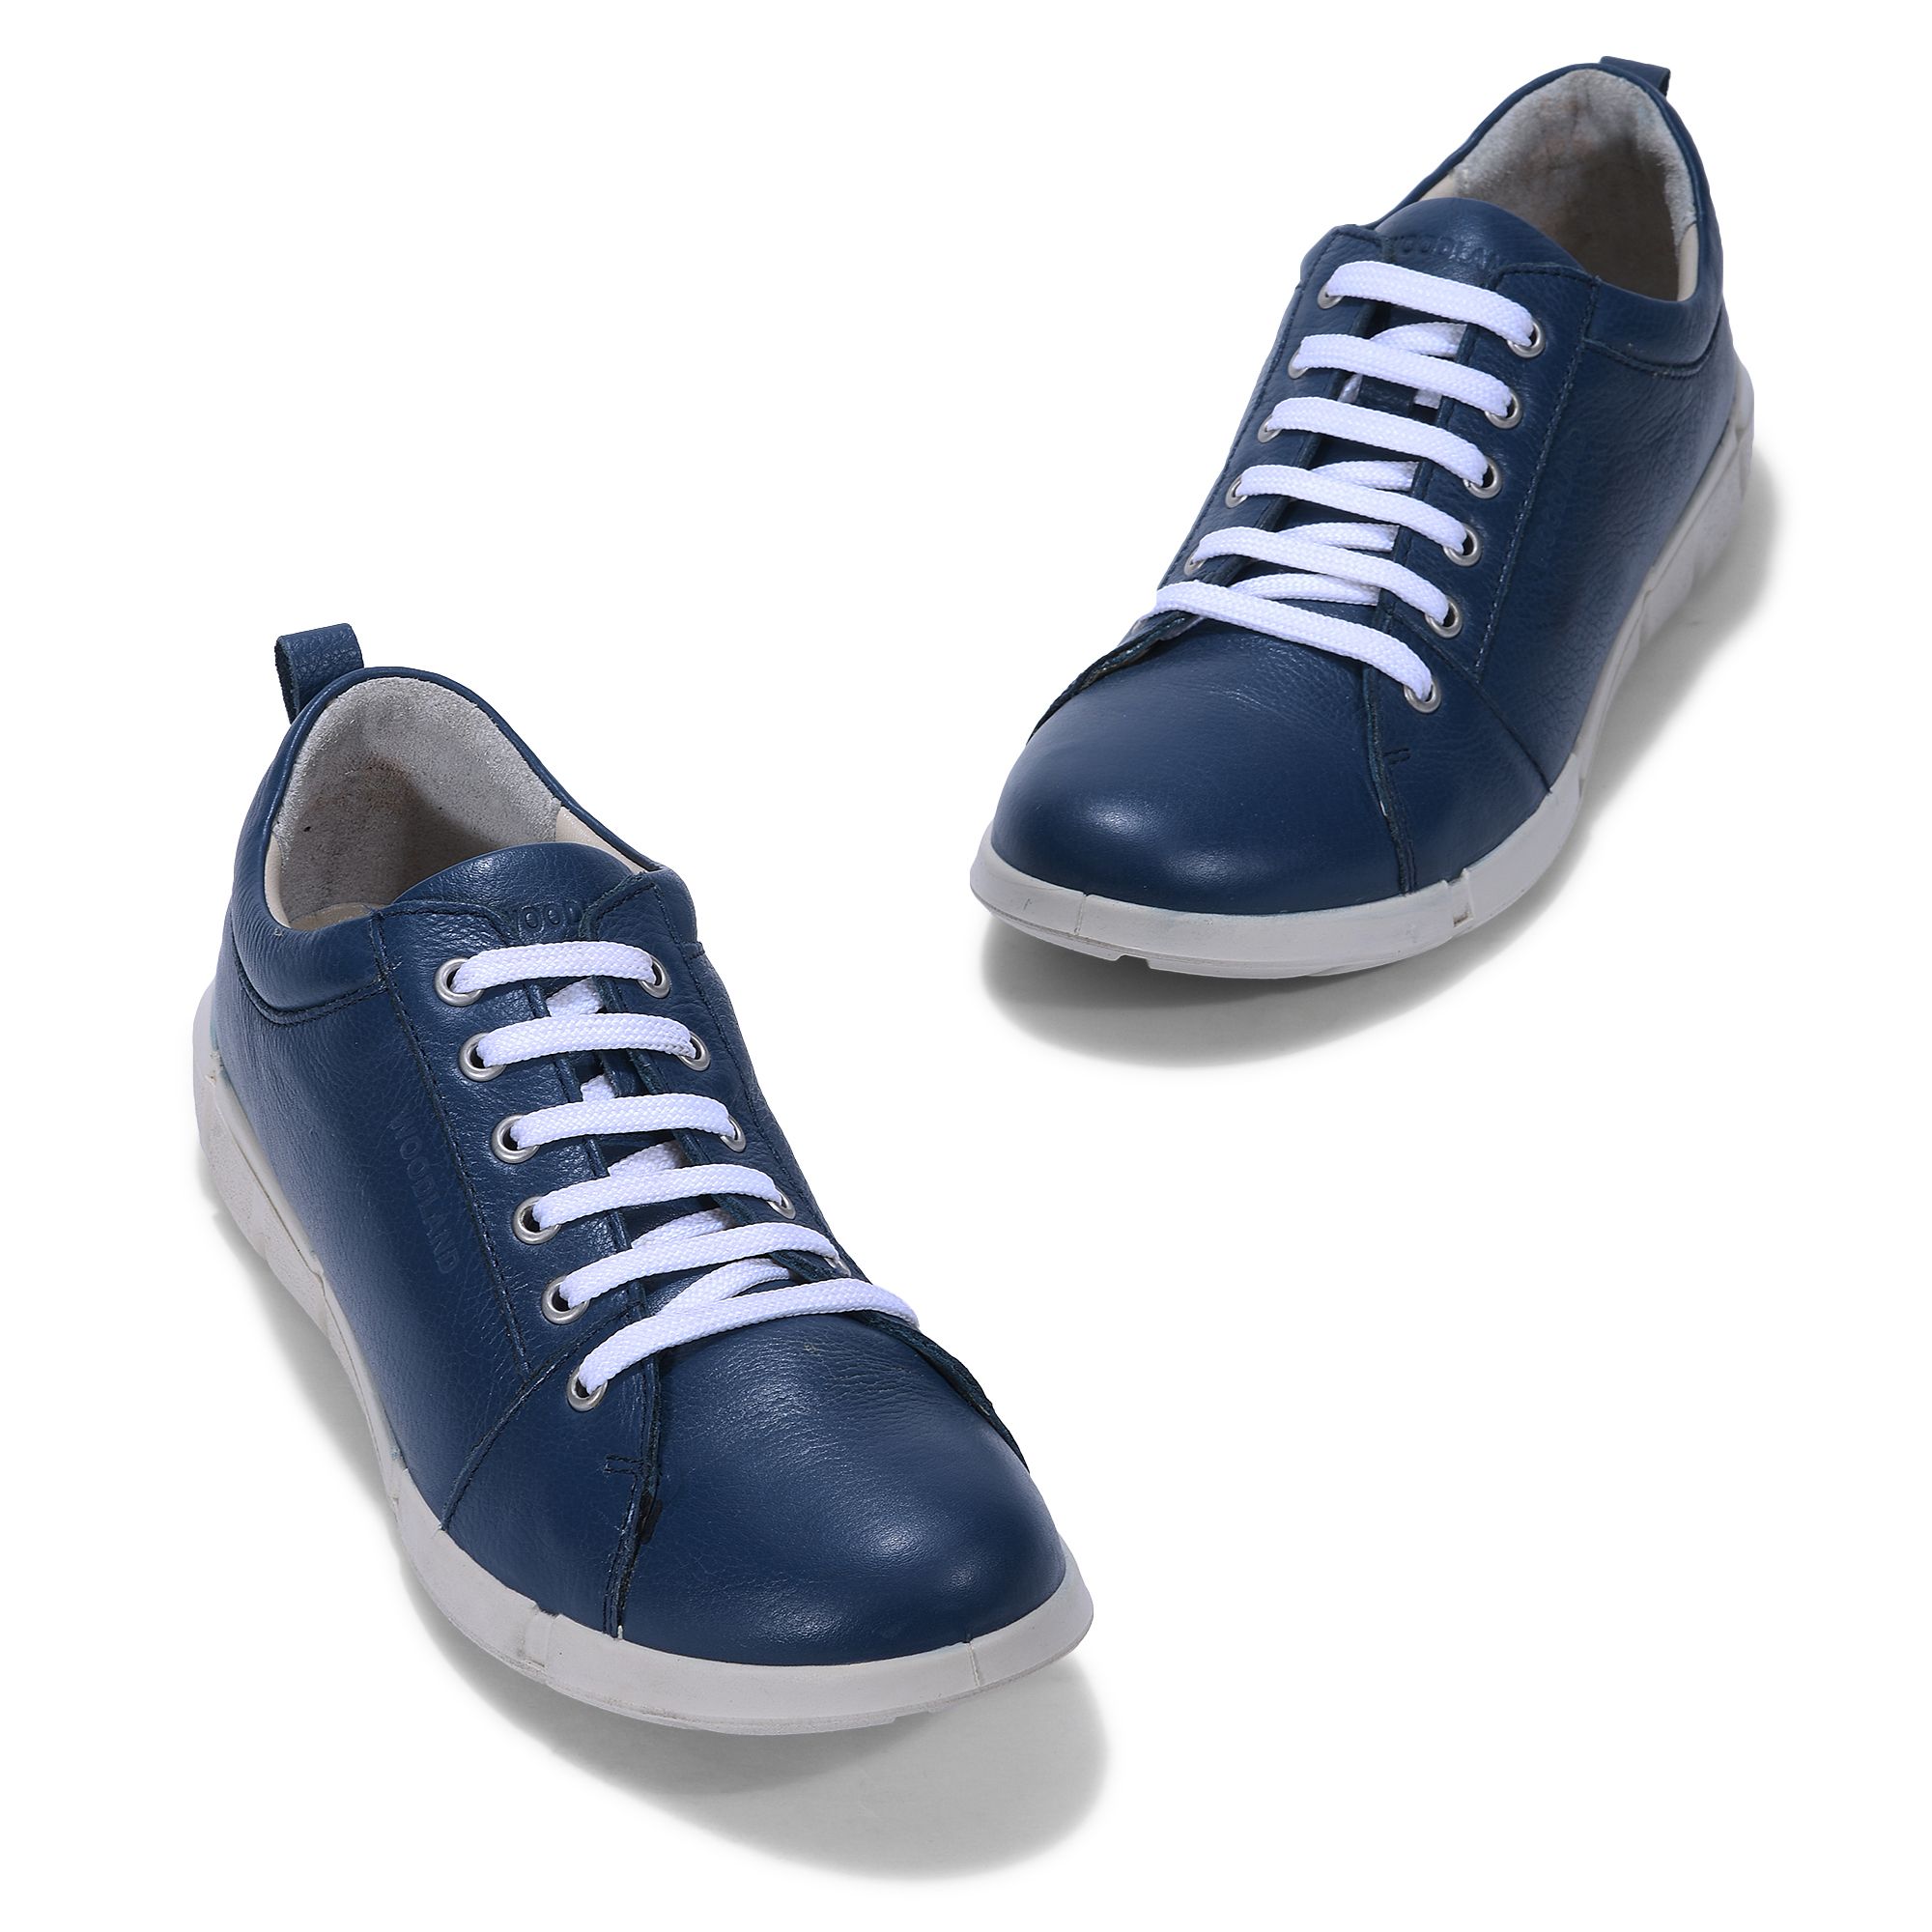 Woodland navy casual sneakers